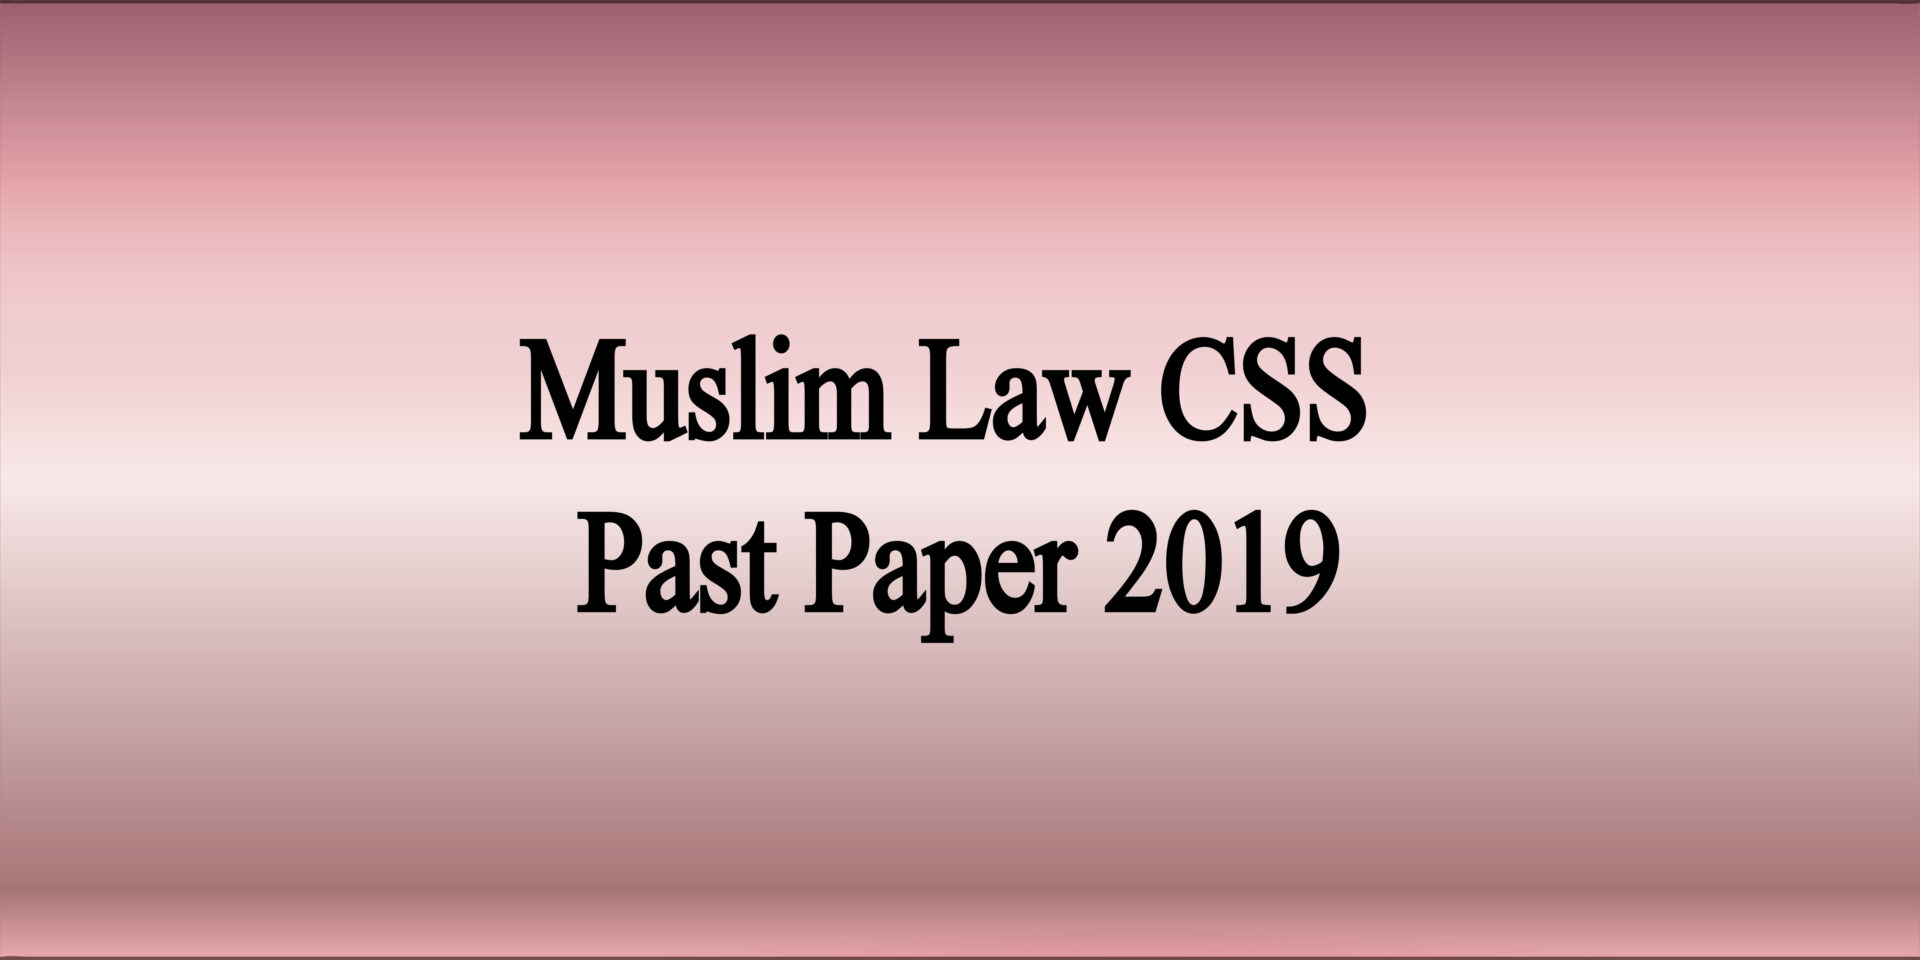 Muslim Law CSS Past Paper 2019